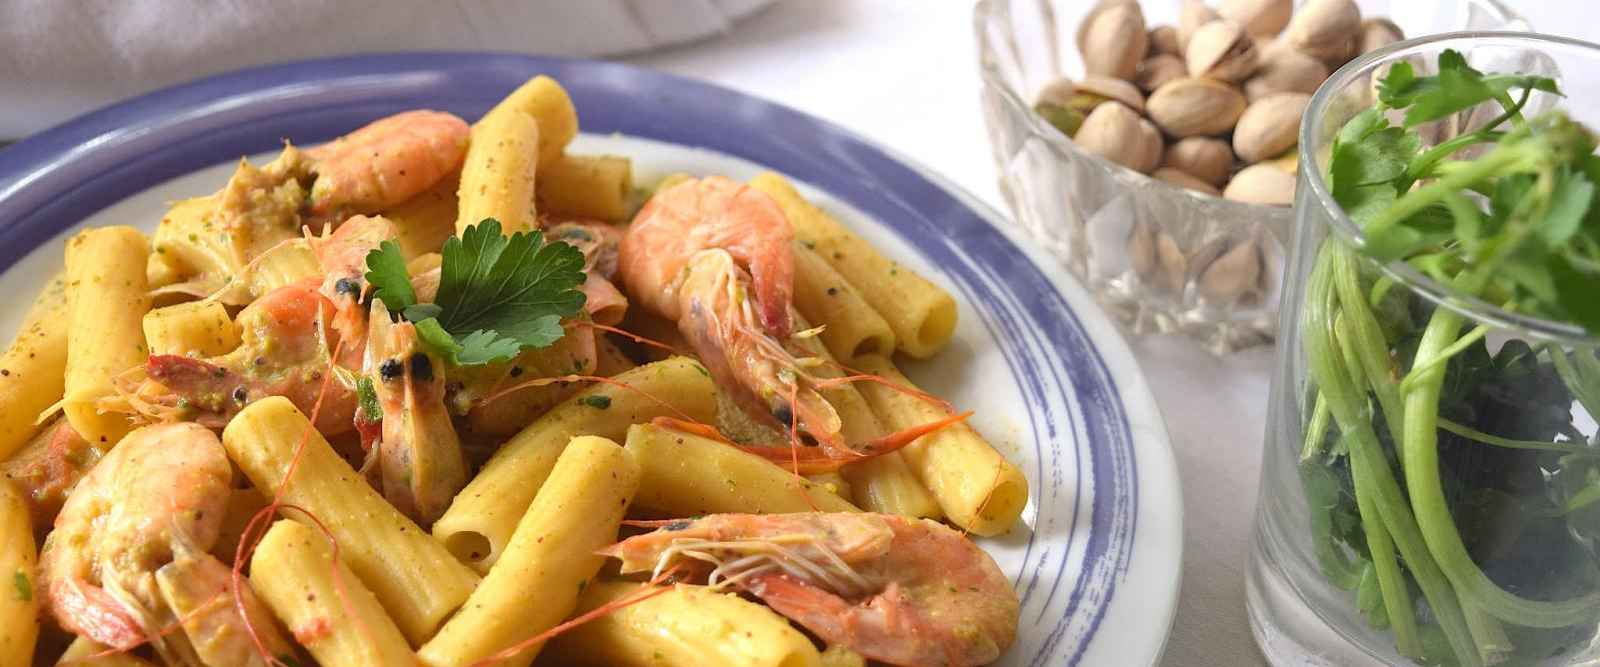 culinary tour of sicily